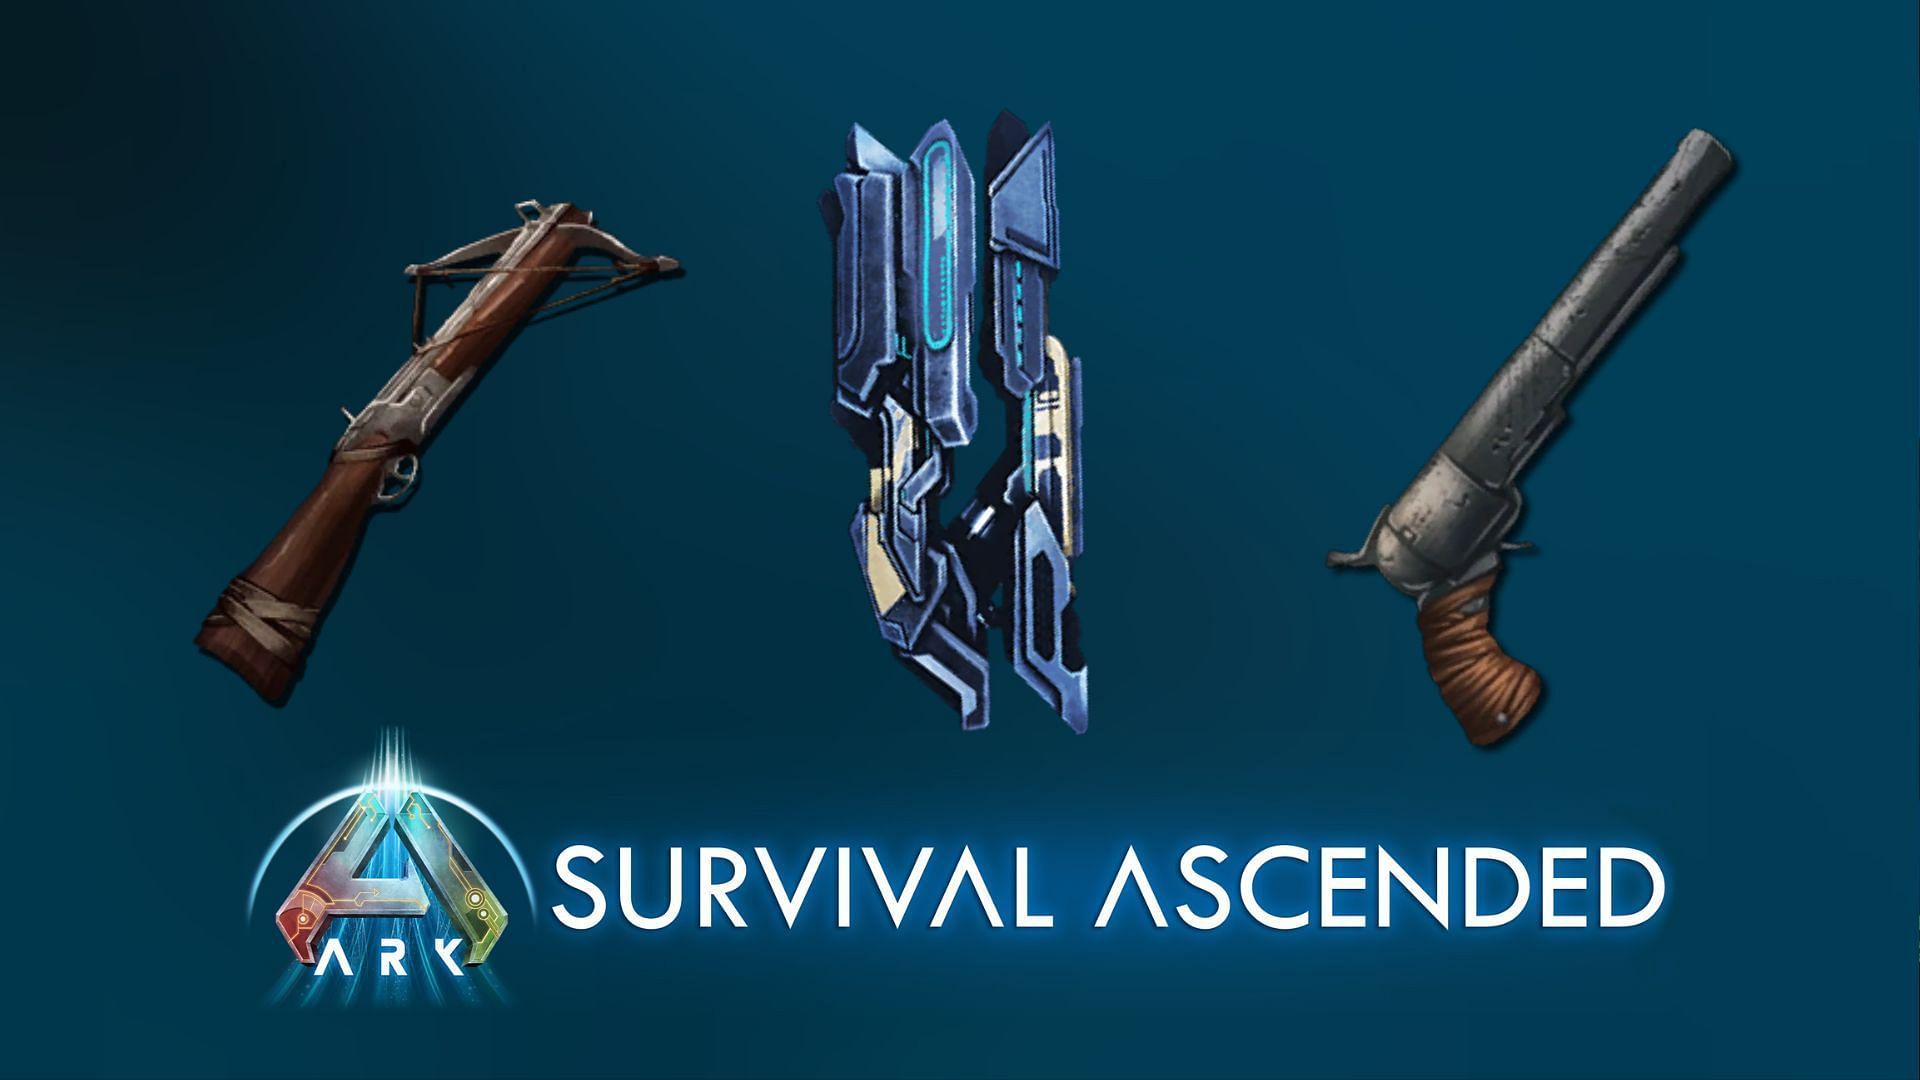 Ark Survival Ascended weapons and ways of crafting them